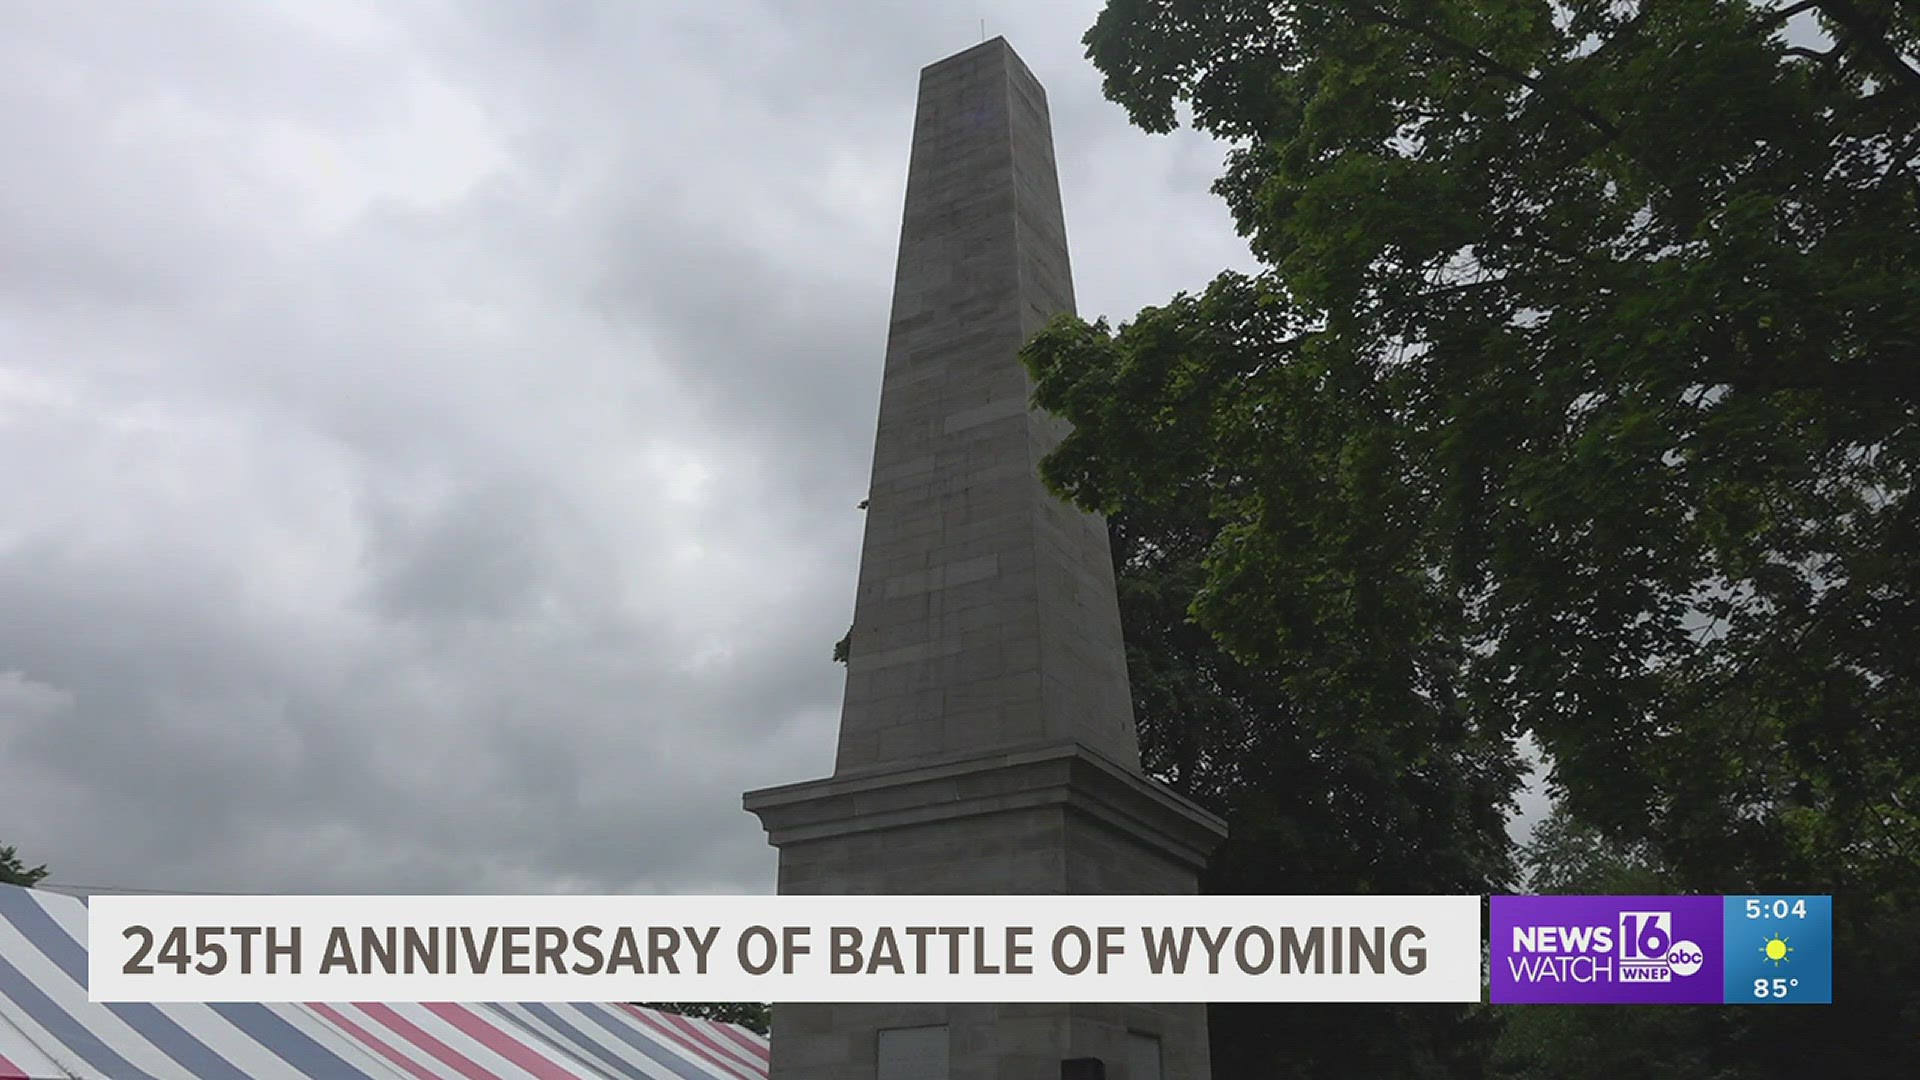 A pivotal Revolutionary War battle took place in the Wyoming Valley 245 years ago, and for the past 145 years, it's been commemorated every Independence Day.